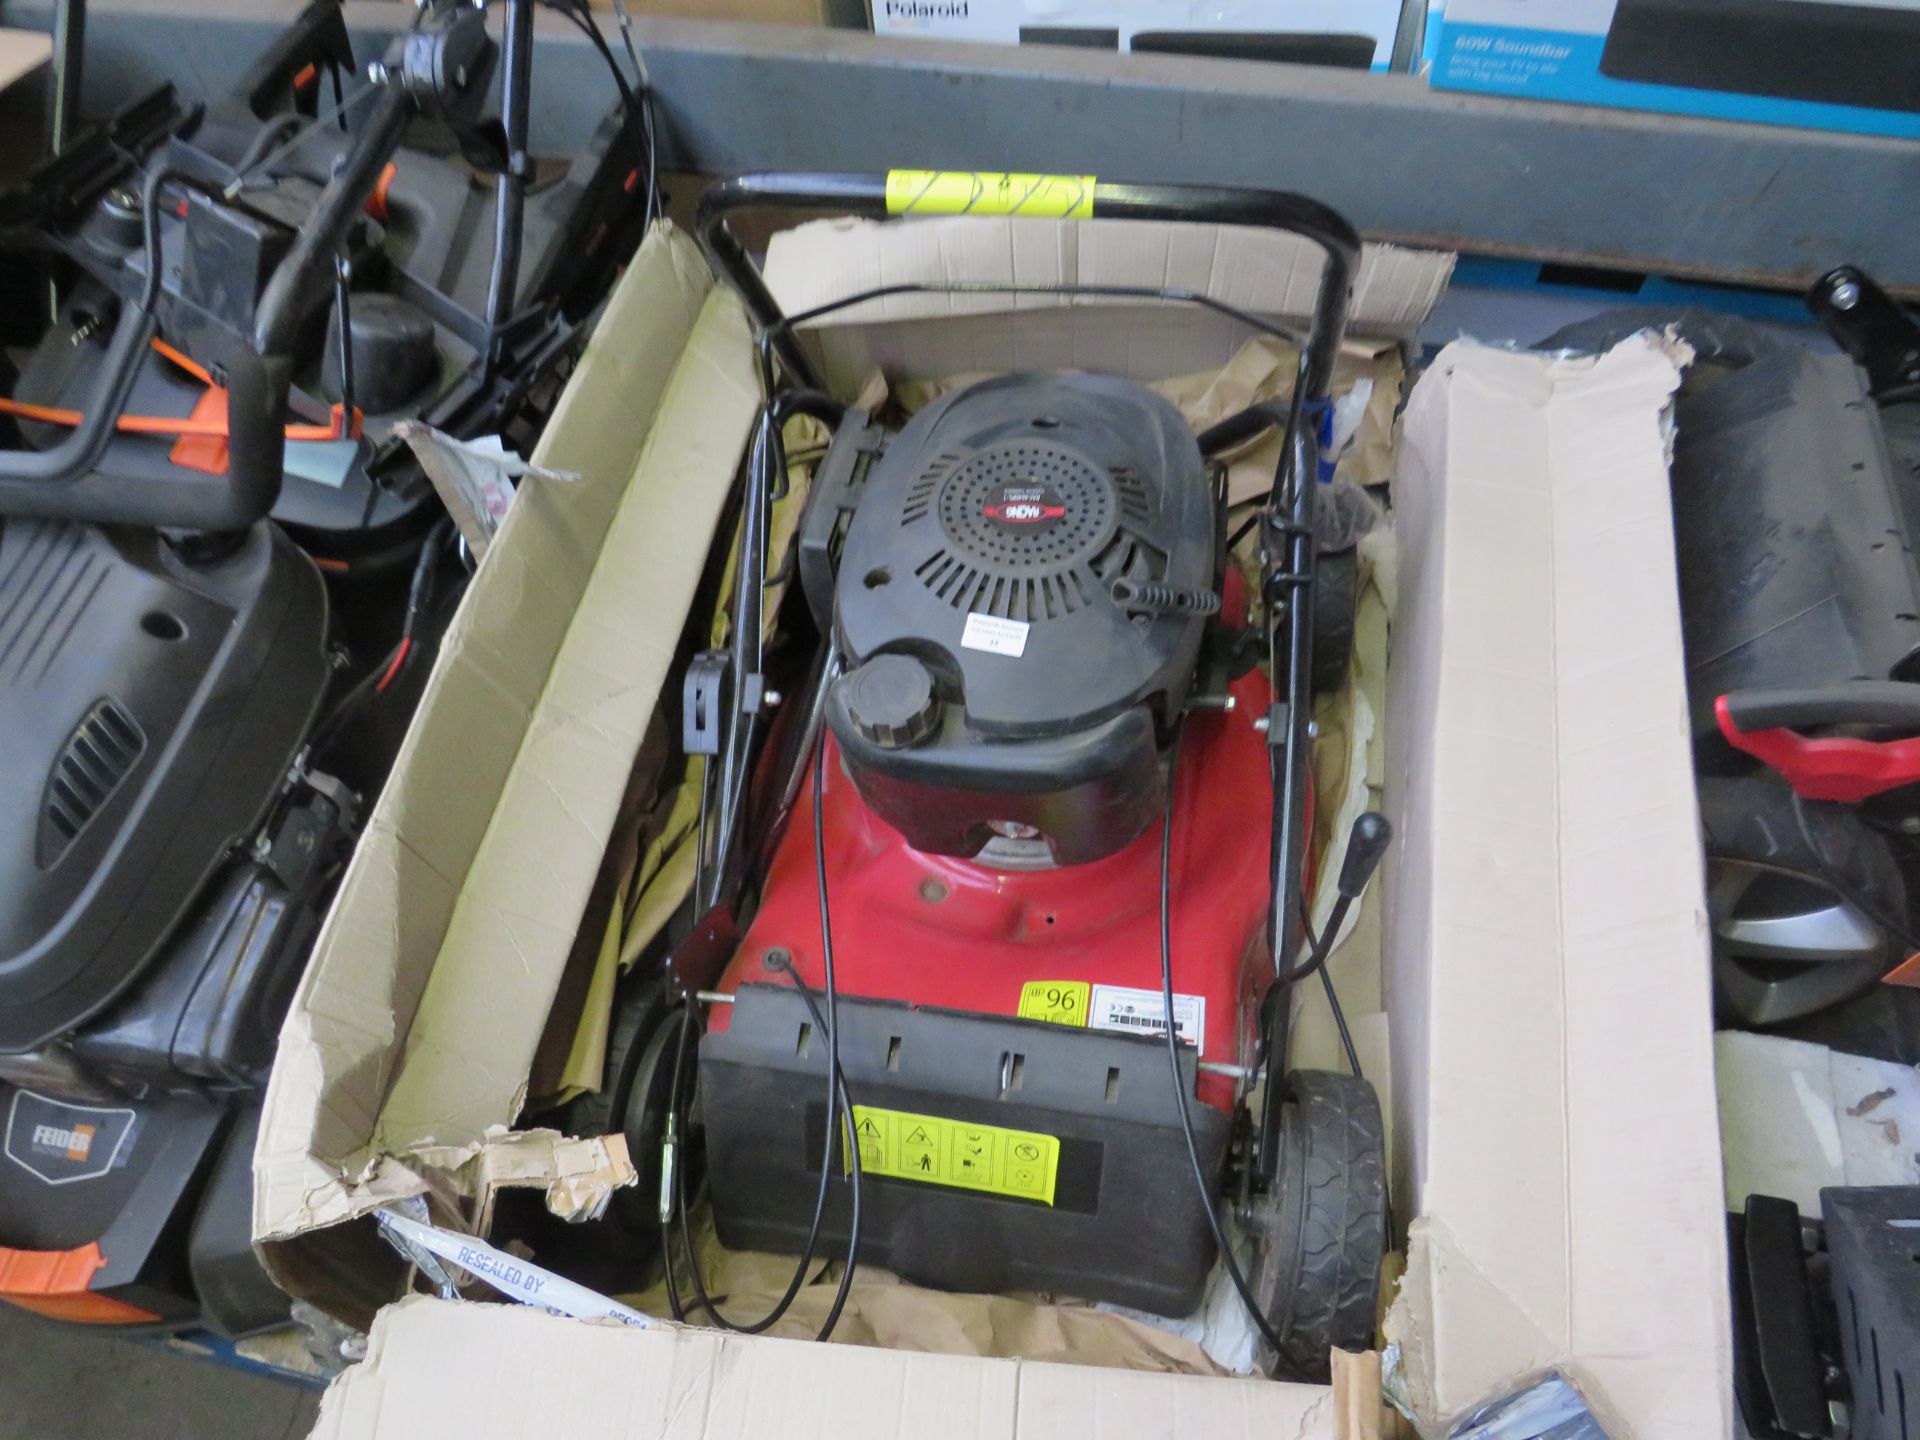 1x Racing - Petrol Lawn Mower RAC4640PL-1 - Unchecked and Untested - RRP £159. @ FR Jones & Sons.